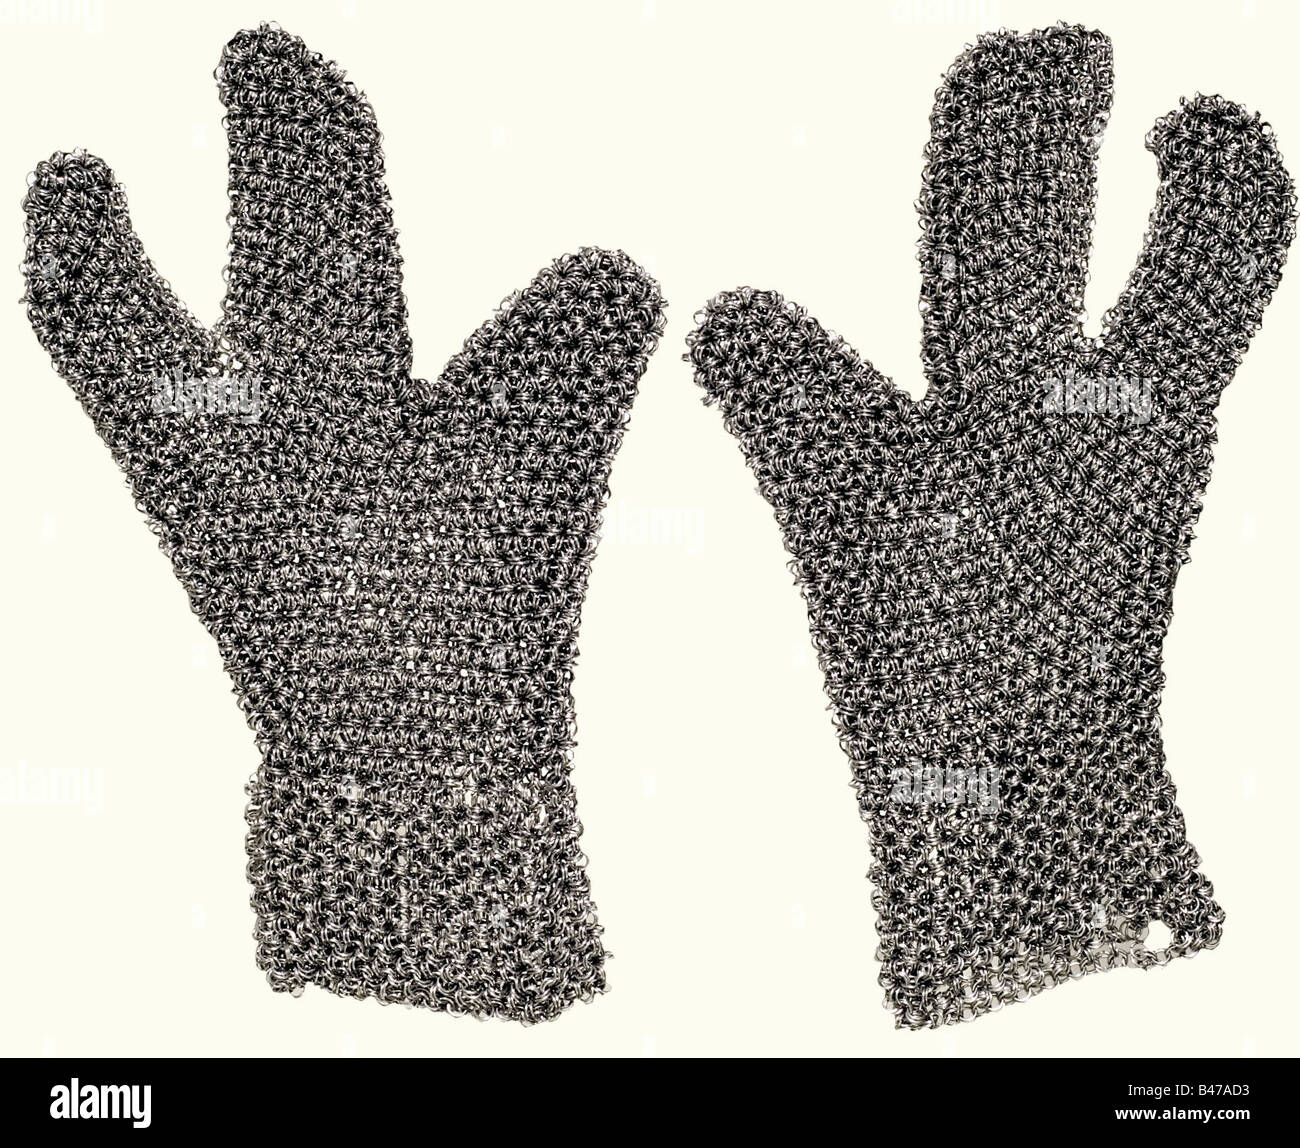 A set of chain mail, Southern Caucasus, 1st half of the 19th century. Hauberk, coif, and gloves, made of mail of different strengths. The rings are not riveted, and in the oriental fashion are always hung on six sides of a central double ring. Short shirt with long sleeves of extremely heavy mail. The interior of the sleeve has been lightly worked. The lower edge is scalloped. Isolated defects. The coif has a heavy calotte and lighter sides and collar. Three-fingered gloves. Length of the hauberk, ca. 68 cm. Extremely high quality workmanship on the hauberk, wh, Stock Photo